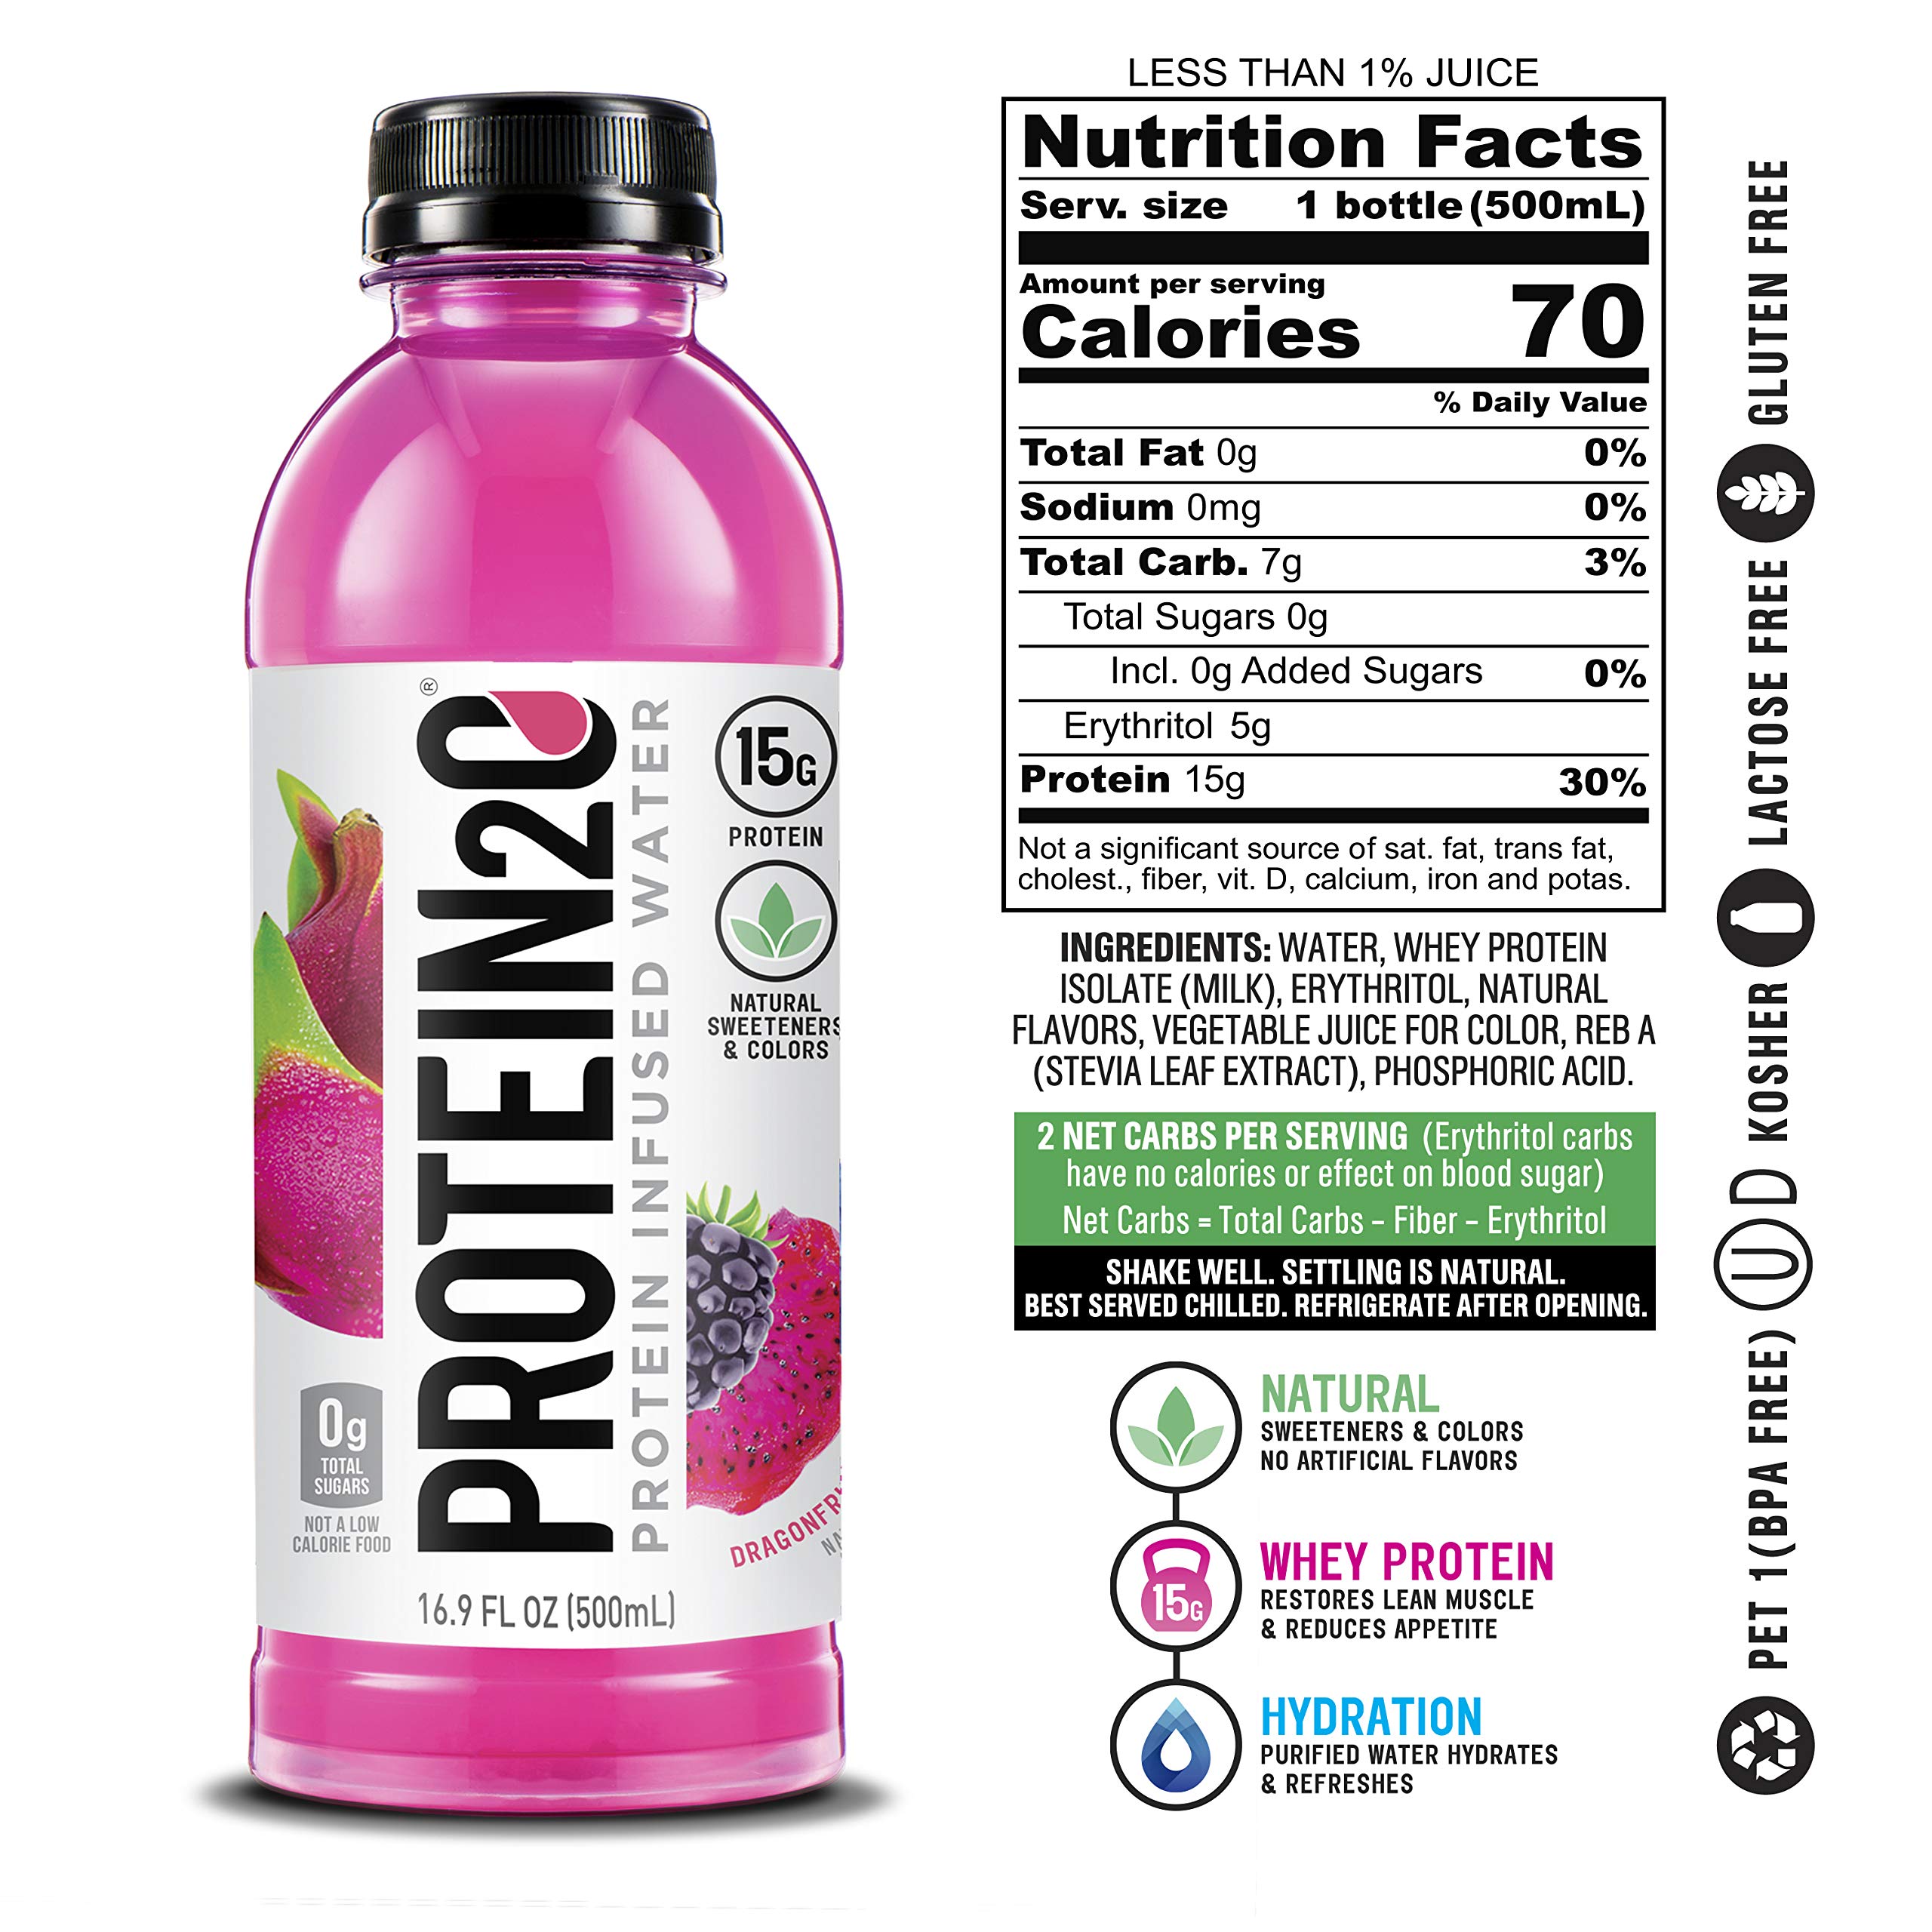 Protein2o 15g Whey Protein Isolate Infused Water, Ready To Drink, Sugar Free, Gluten Free, Lactose Free, No Artificial Sweeteners, Dragonfruit Blackberry, 16.9 oz Bottle (Pack of 12)